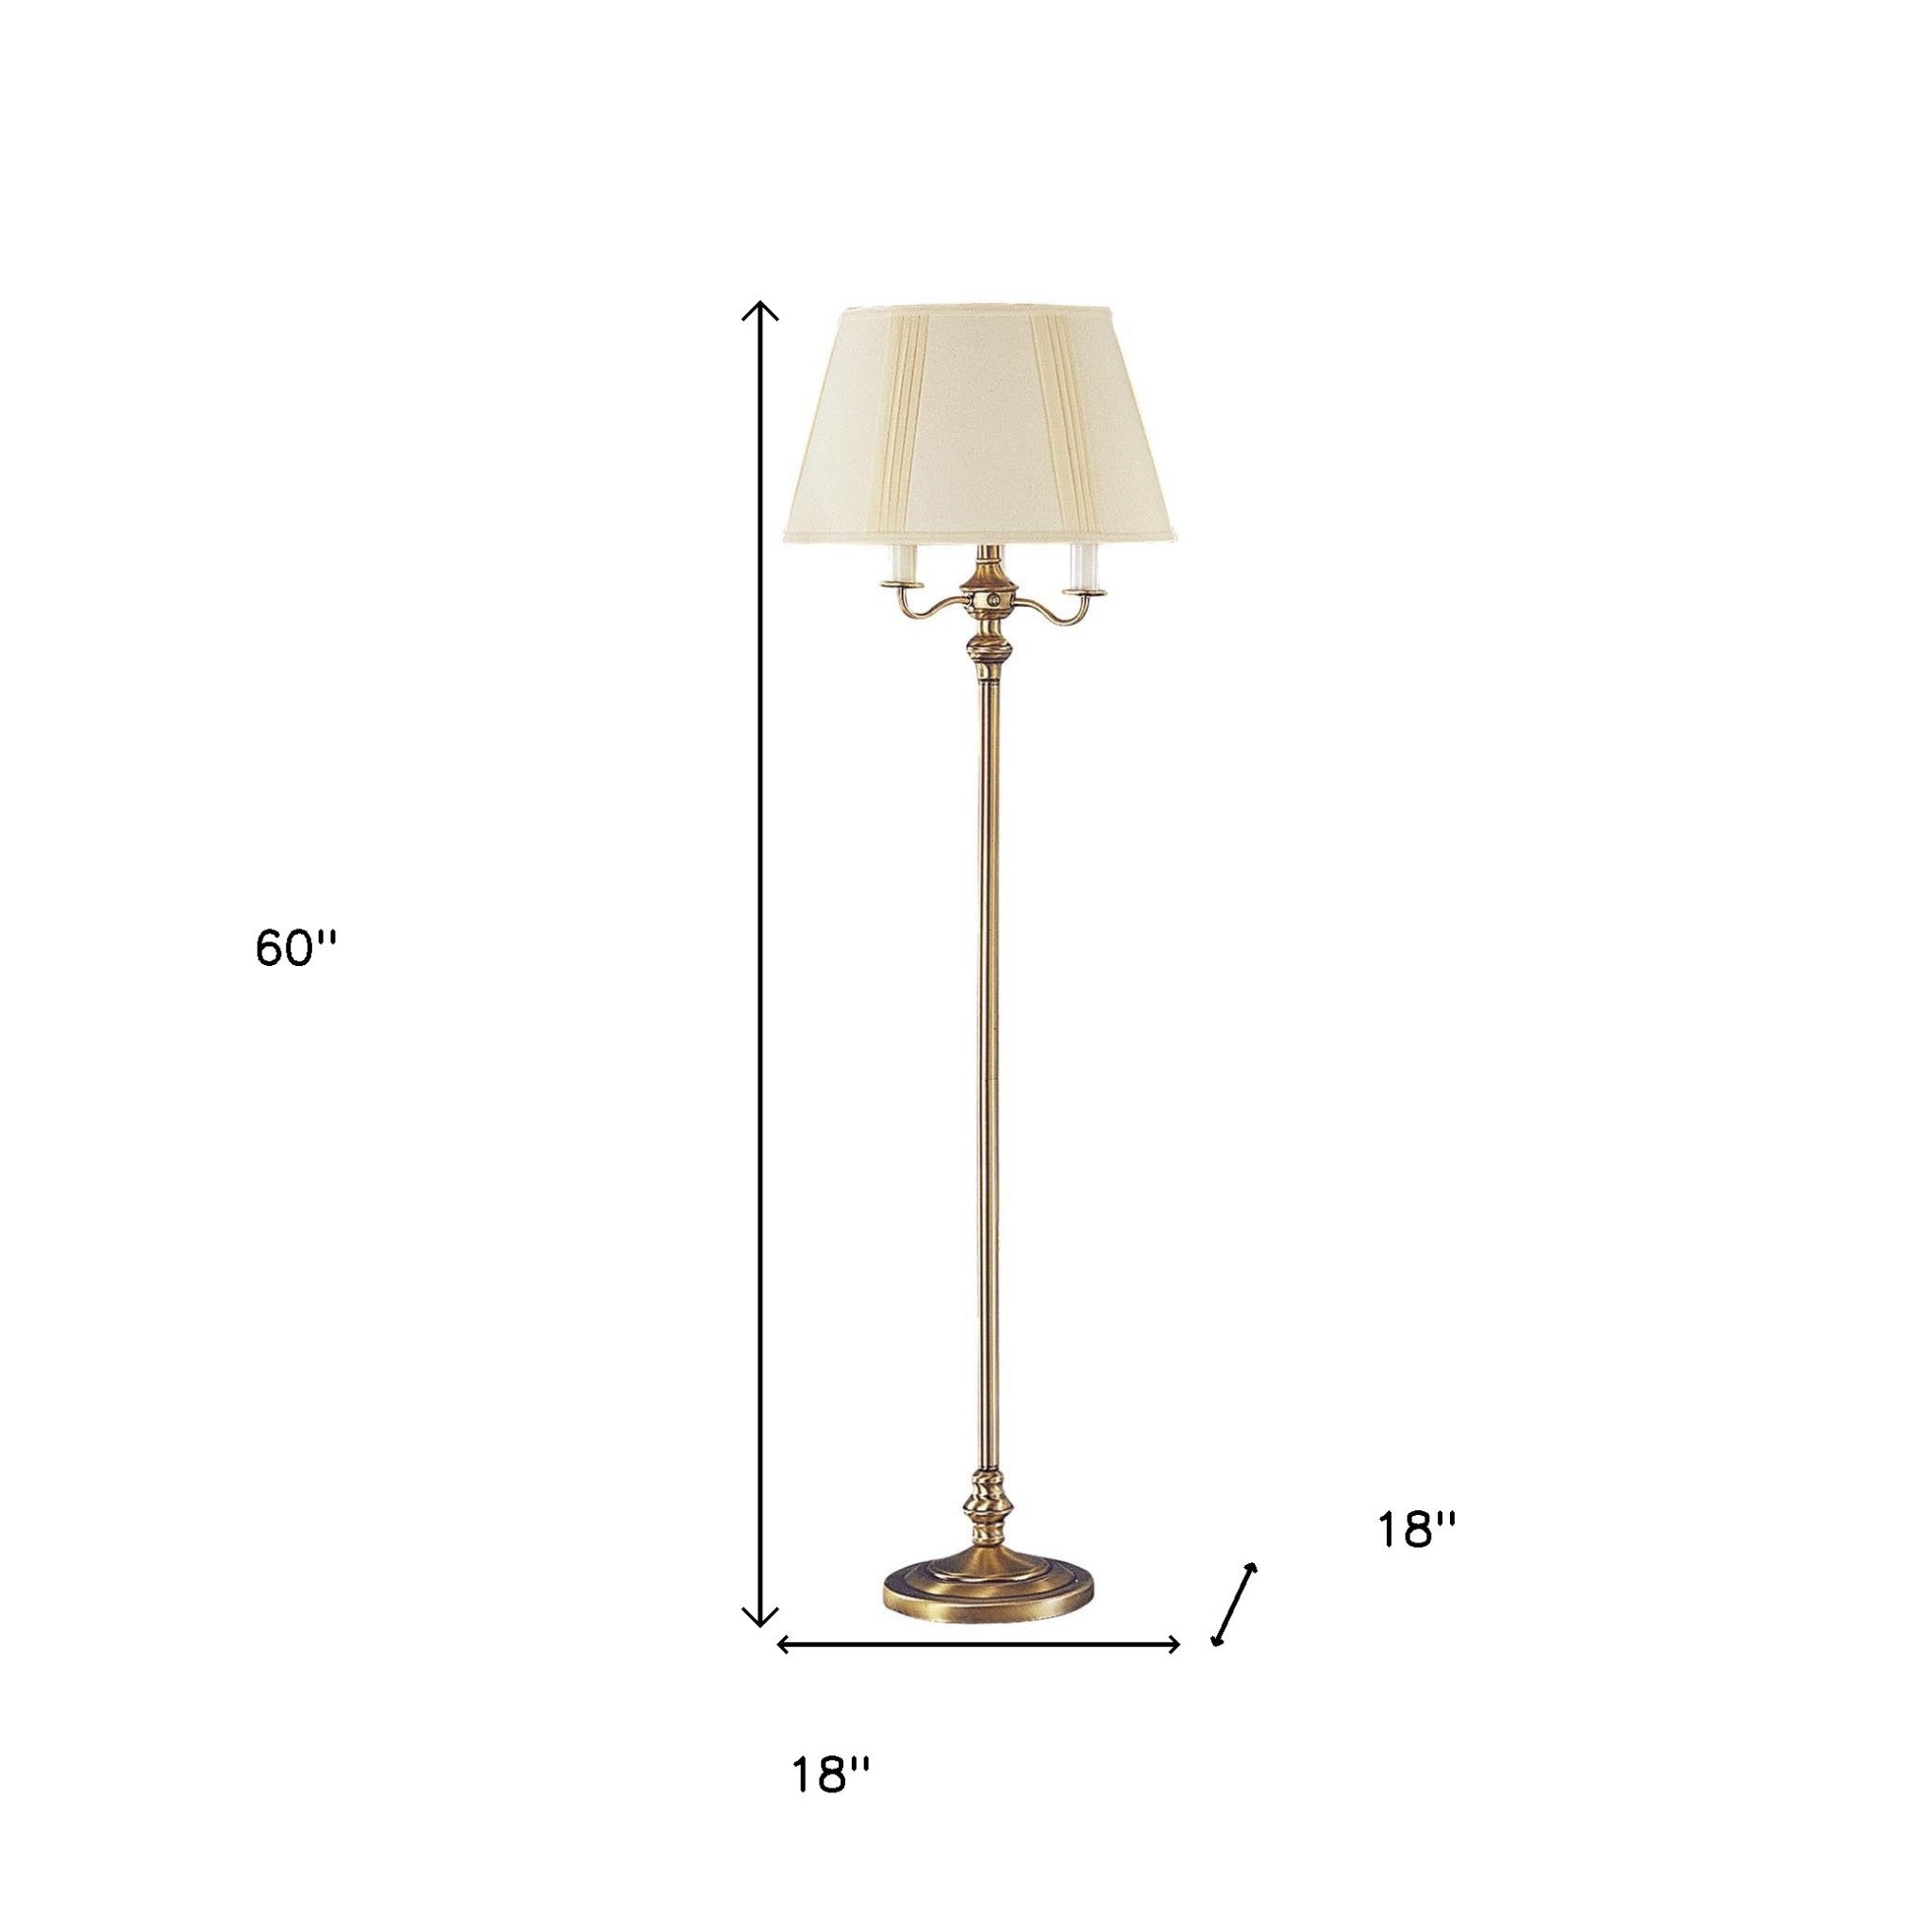 60" Bronze Four Light Traditional Shaped Floor Lamp With Beige Square Shade